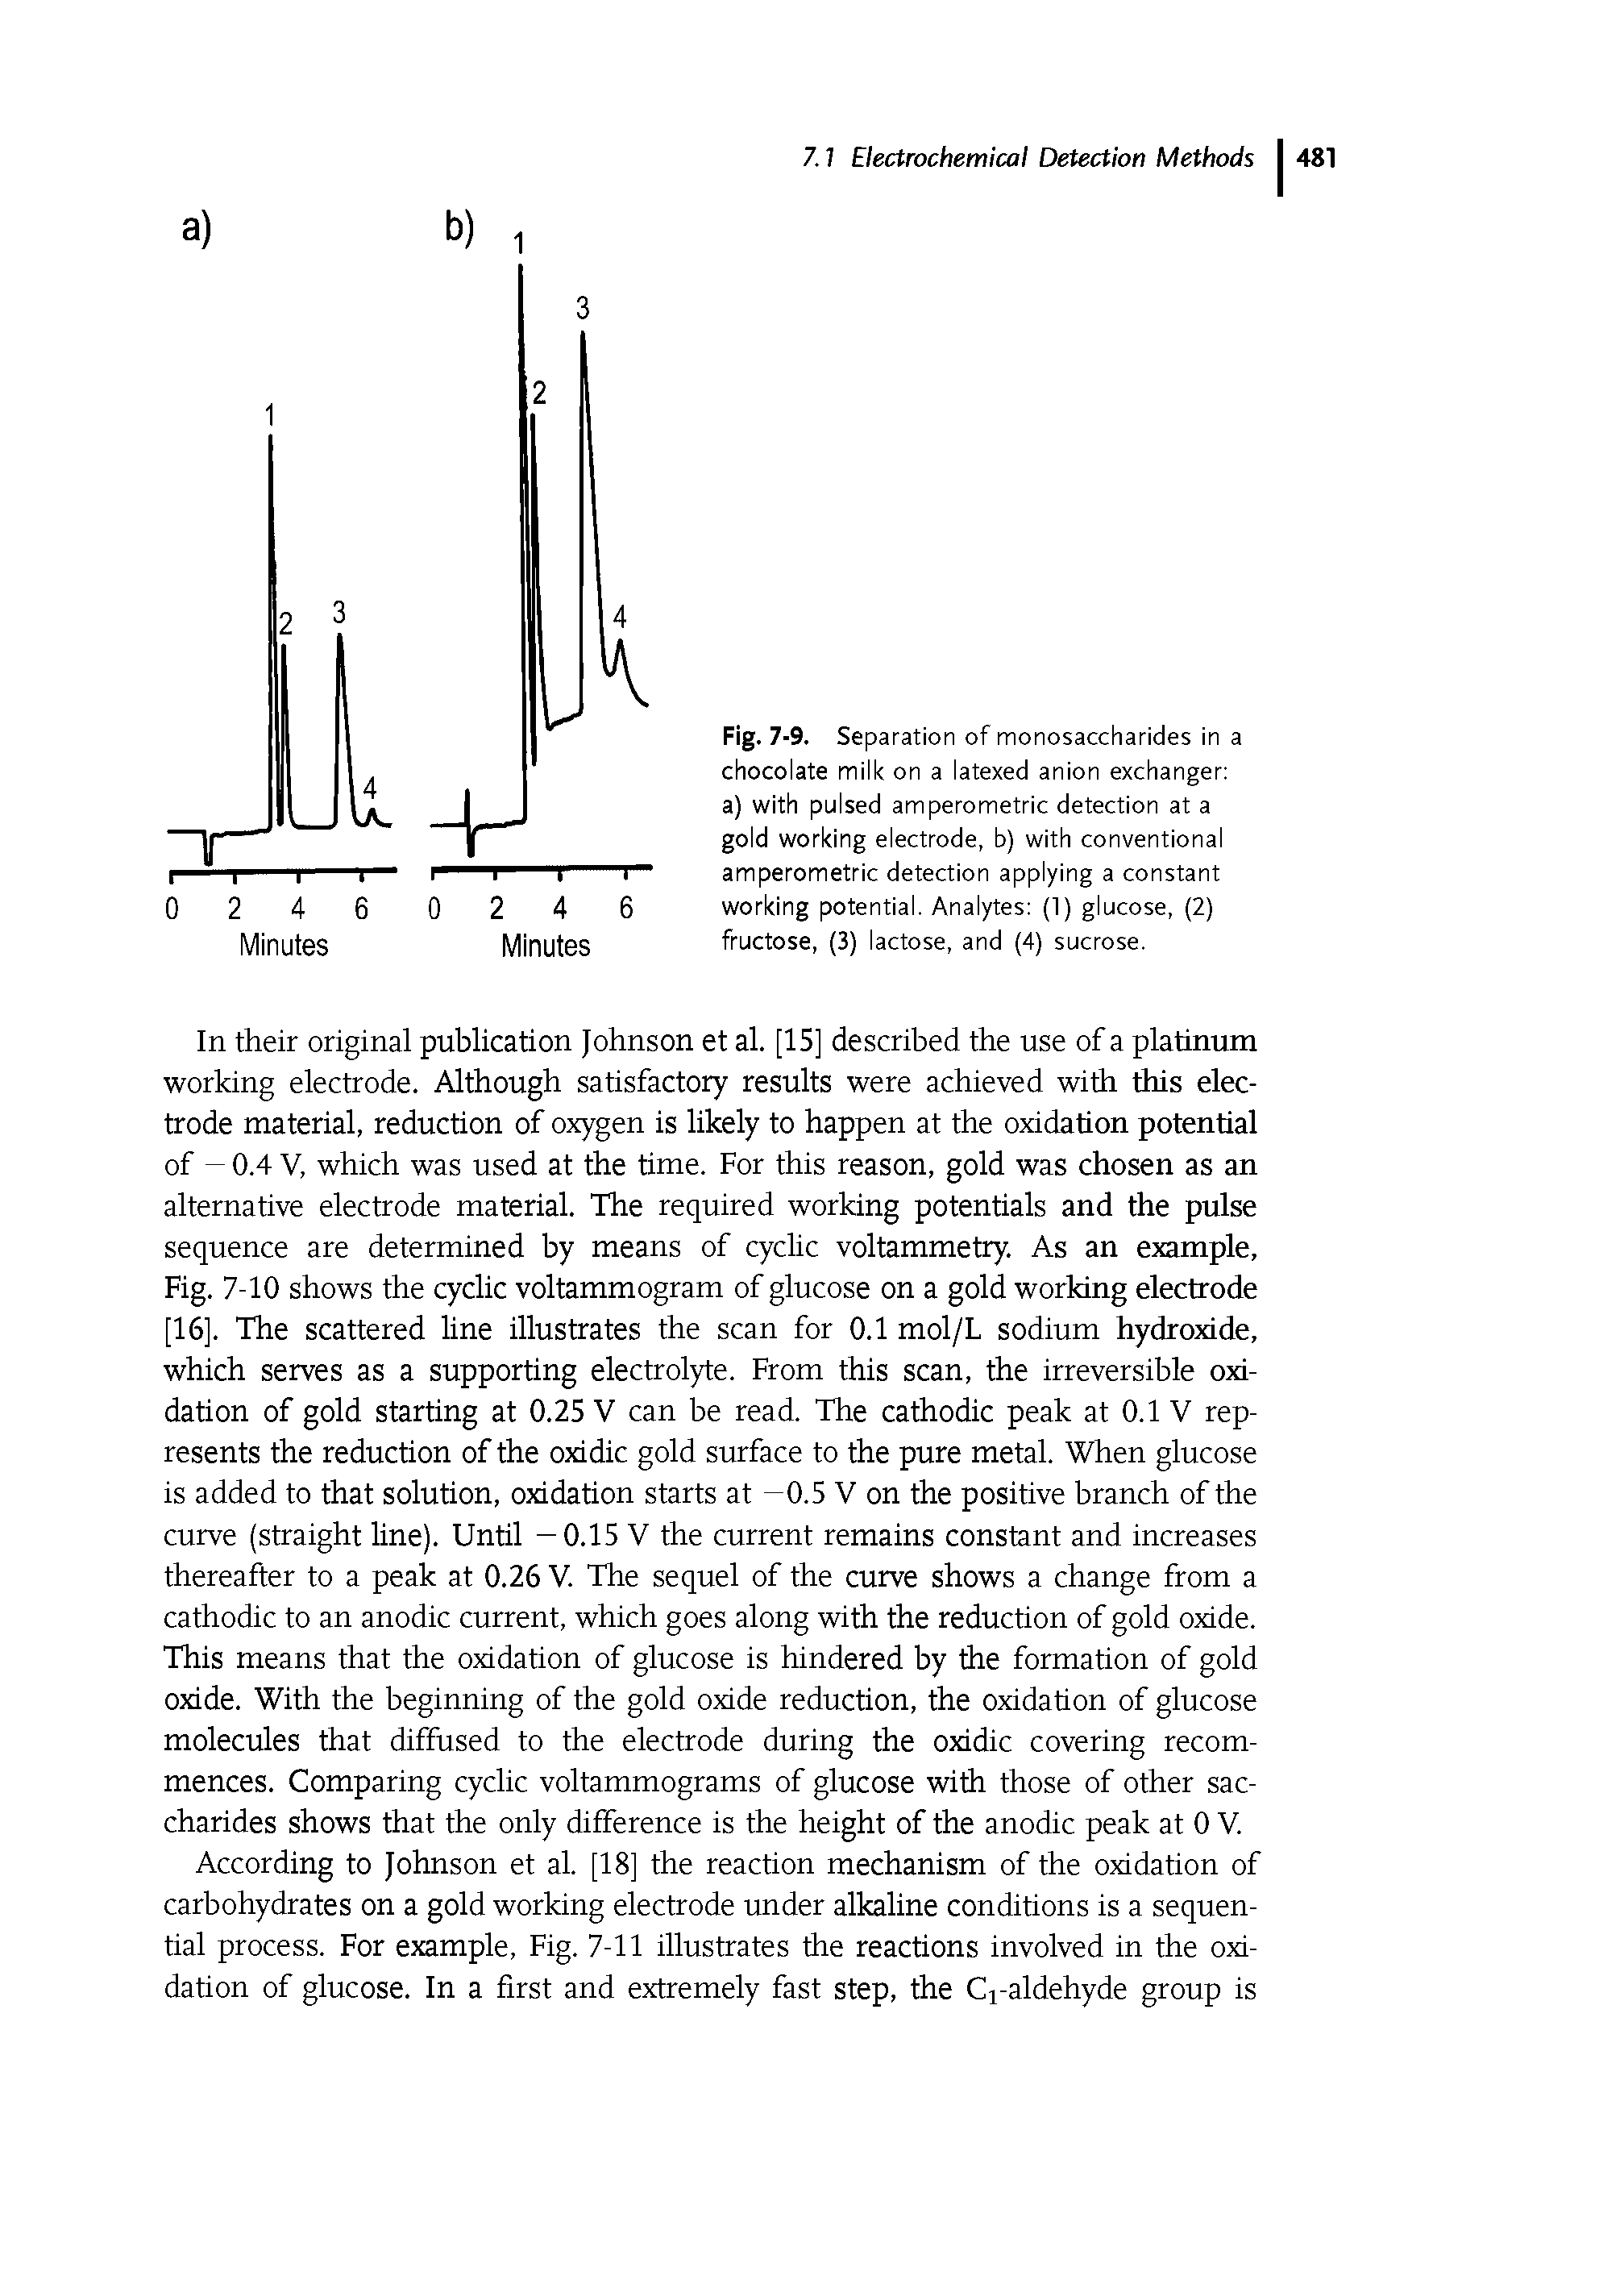 Fig. 7-9. Separation of monosaccharides in a chocolate milk on a latexed anion exchanger a) with pulsed amperometric detection at a gold working electrode, b) with conventional amperometric detection applying a constant working potential. Analytes (1) glucose, (2) fructose, (3) lactose, and (4) sucrose.